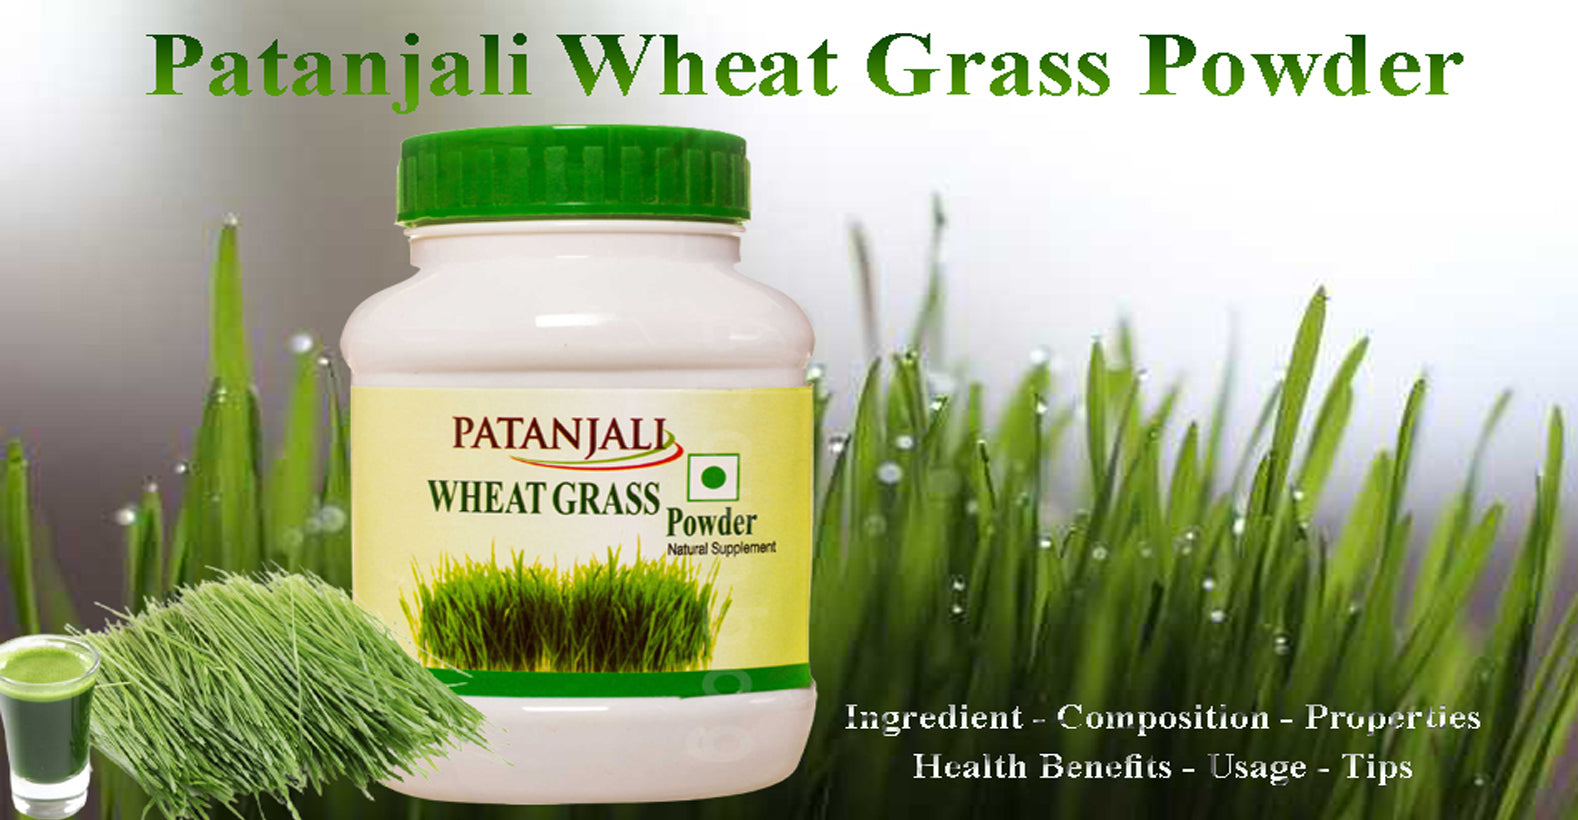 Patanjali Wheat Grass Powder - Ingredients, Composition, Properties, Health Benefits, Usage, Tips